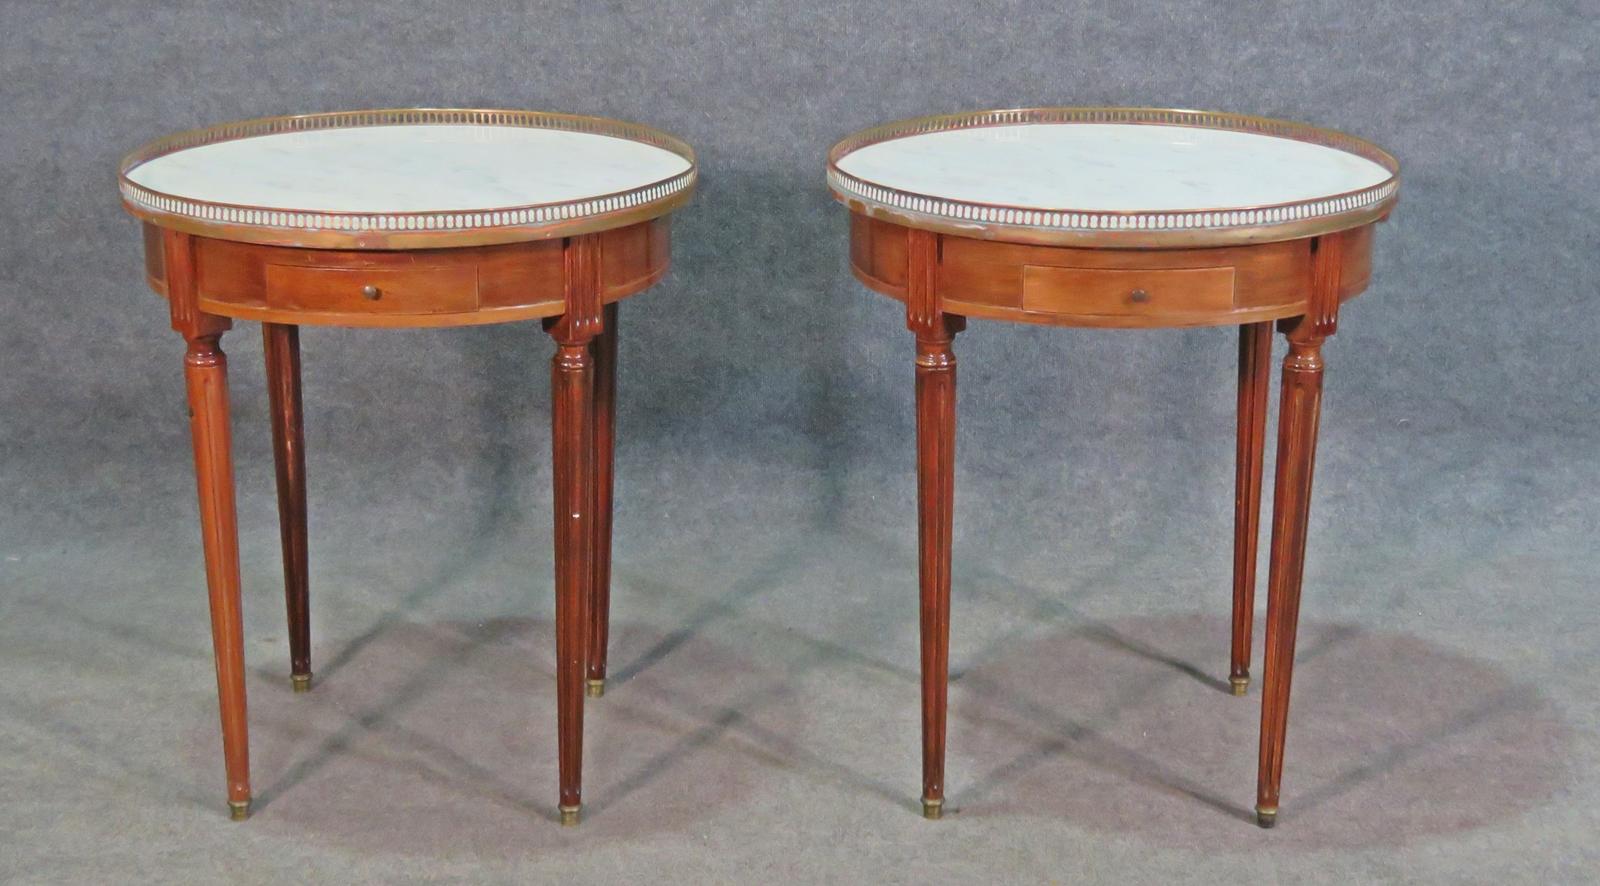 Pair of French Louis XVI Mahogany Gueridons End Tables with Brass Gallery In Good Condition For Sale In Swedesboro, NJ